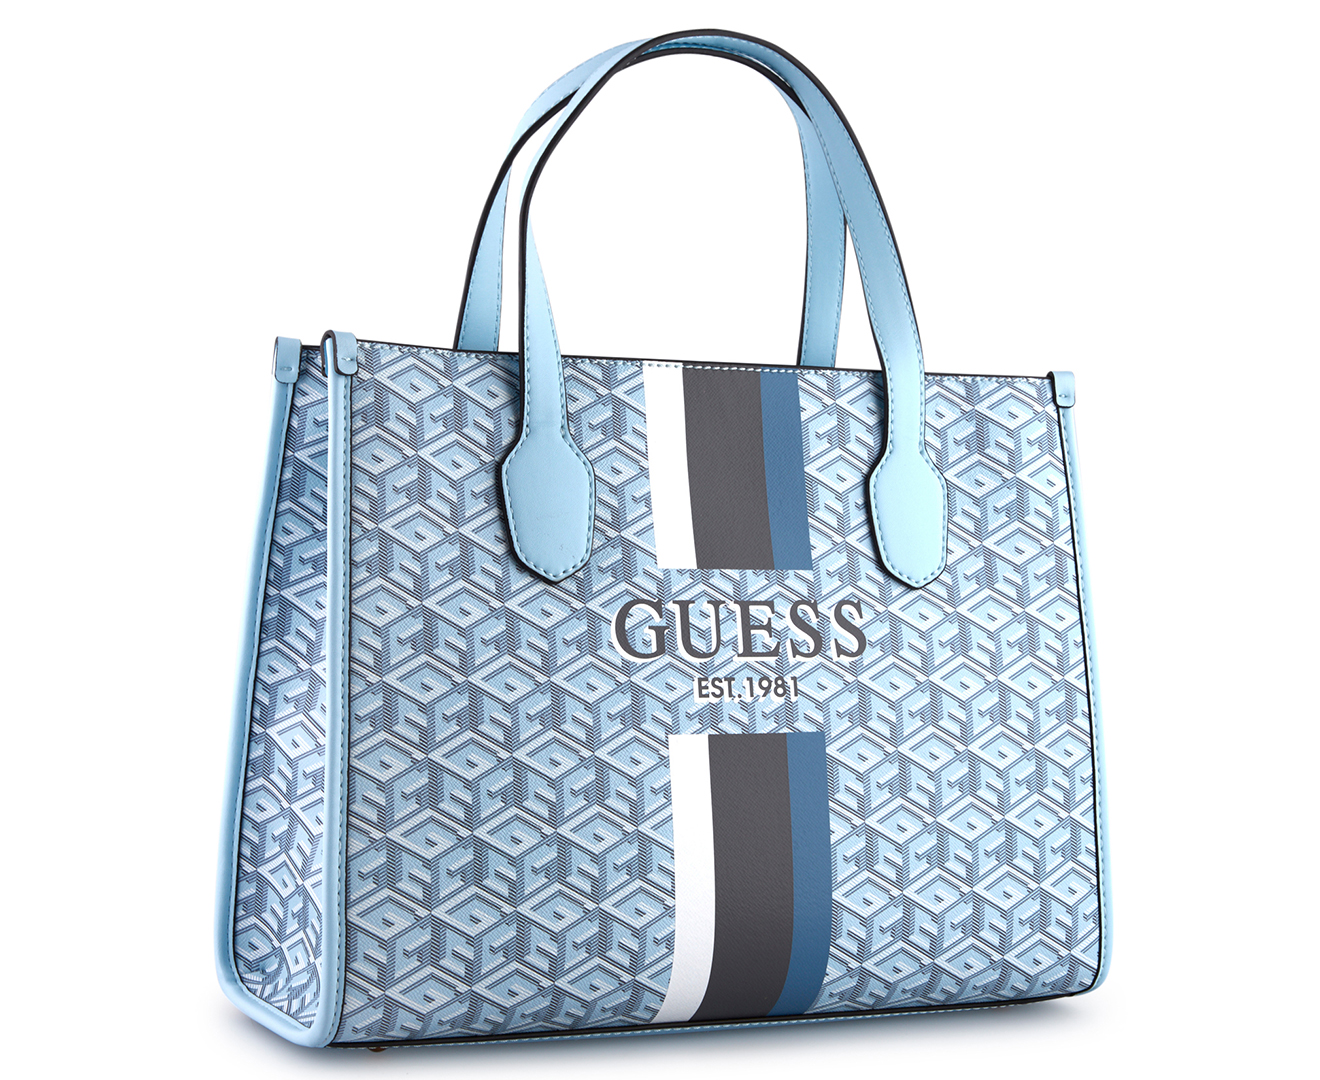 GUESS Silvana Two-Compartment Tote Bag - Ice Blue Logo